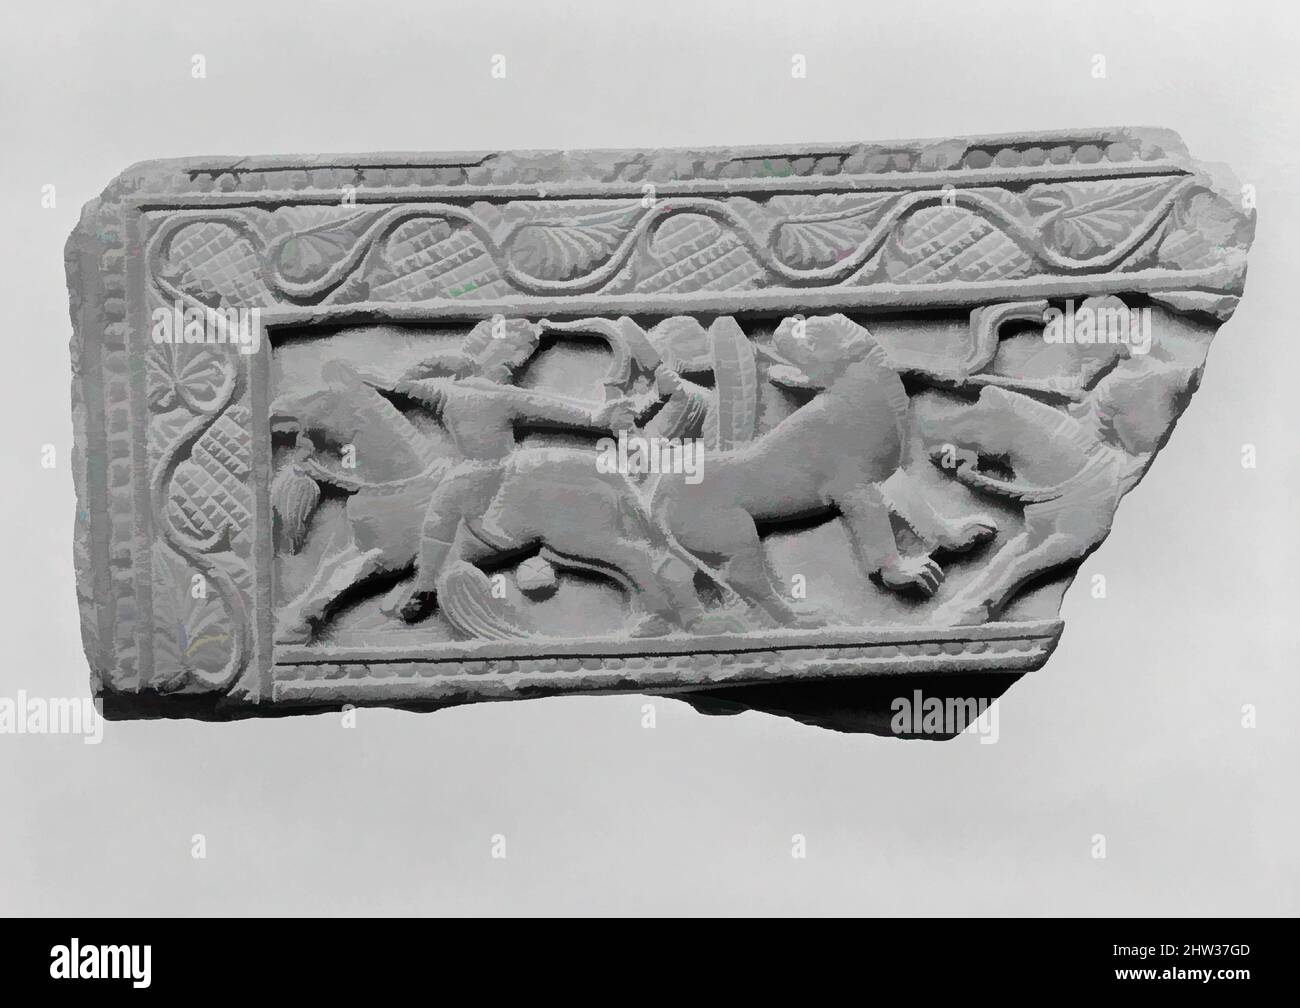 Art inspired by Fragment of a Lid (?) with a Hunting Scene, 5th–6th century, Pakistan (ancient region of Gandhara), Stone, Overall: 2 x 3 7/8 in. (5.1 x 9.8 cm), Sculpture, Box lids are rare examples of nonreligious art of the fifth century, little of which has survived. They are, Classic works modernized by Artotop with a splash of modernity. Shapes, color and value, eye-catching visual impact on art. Emotions through freedom of artworks in a contemporary way. A timeless message pursuing a wildly creative new direction. Artists turning to the digital medium and creating the Artotop NFT Stock Photo